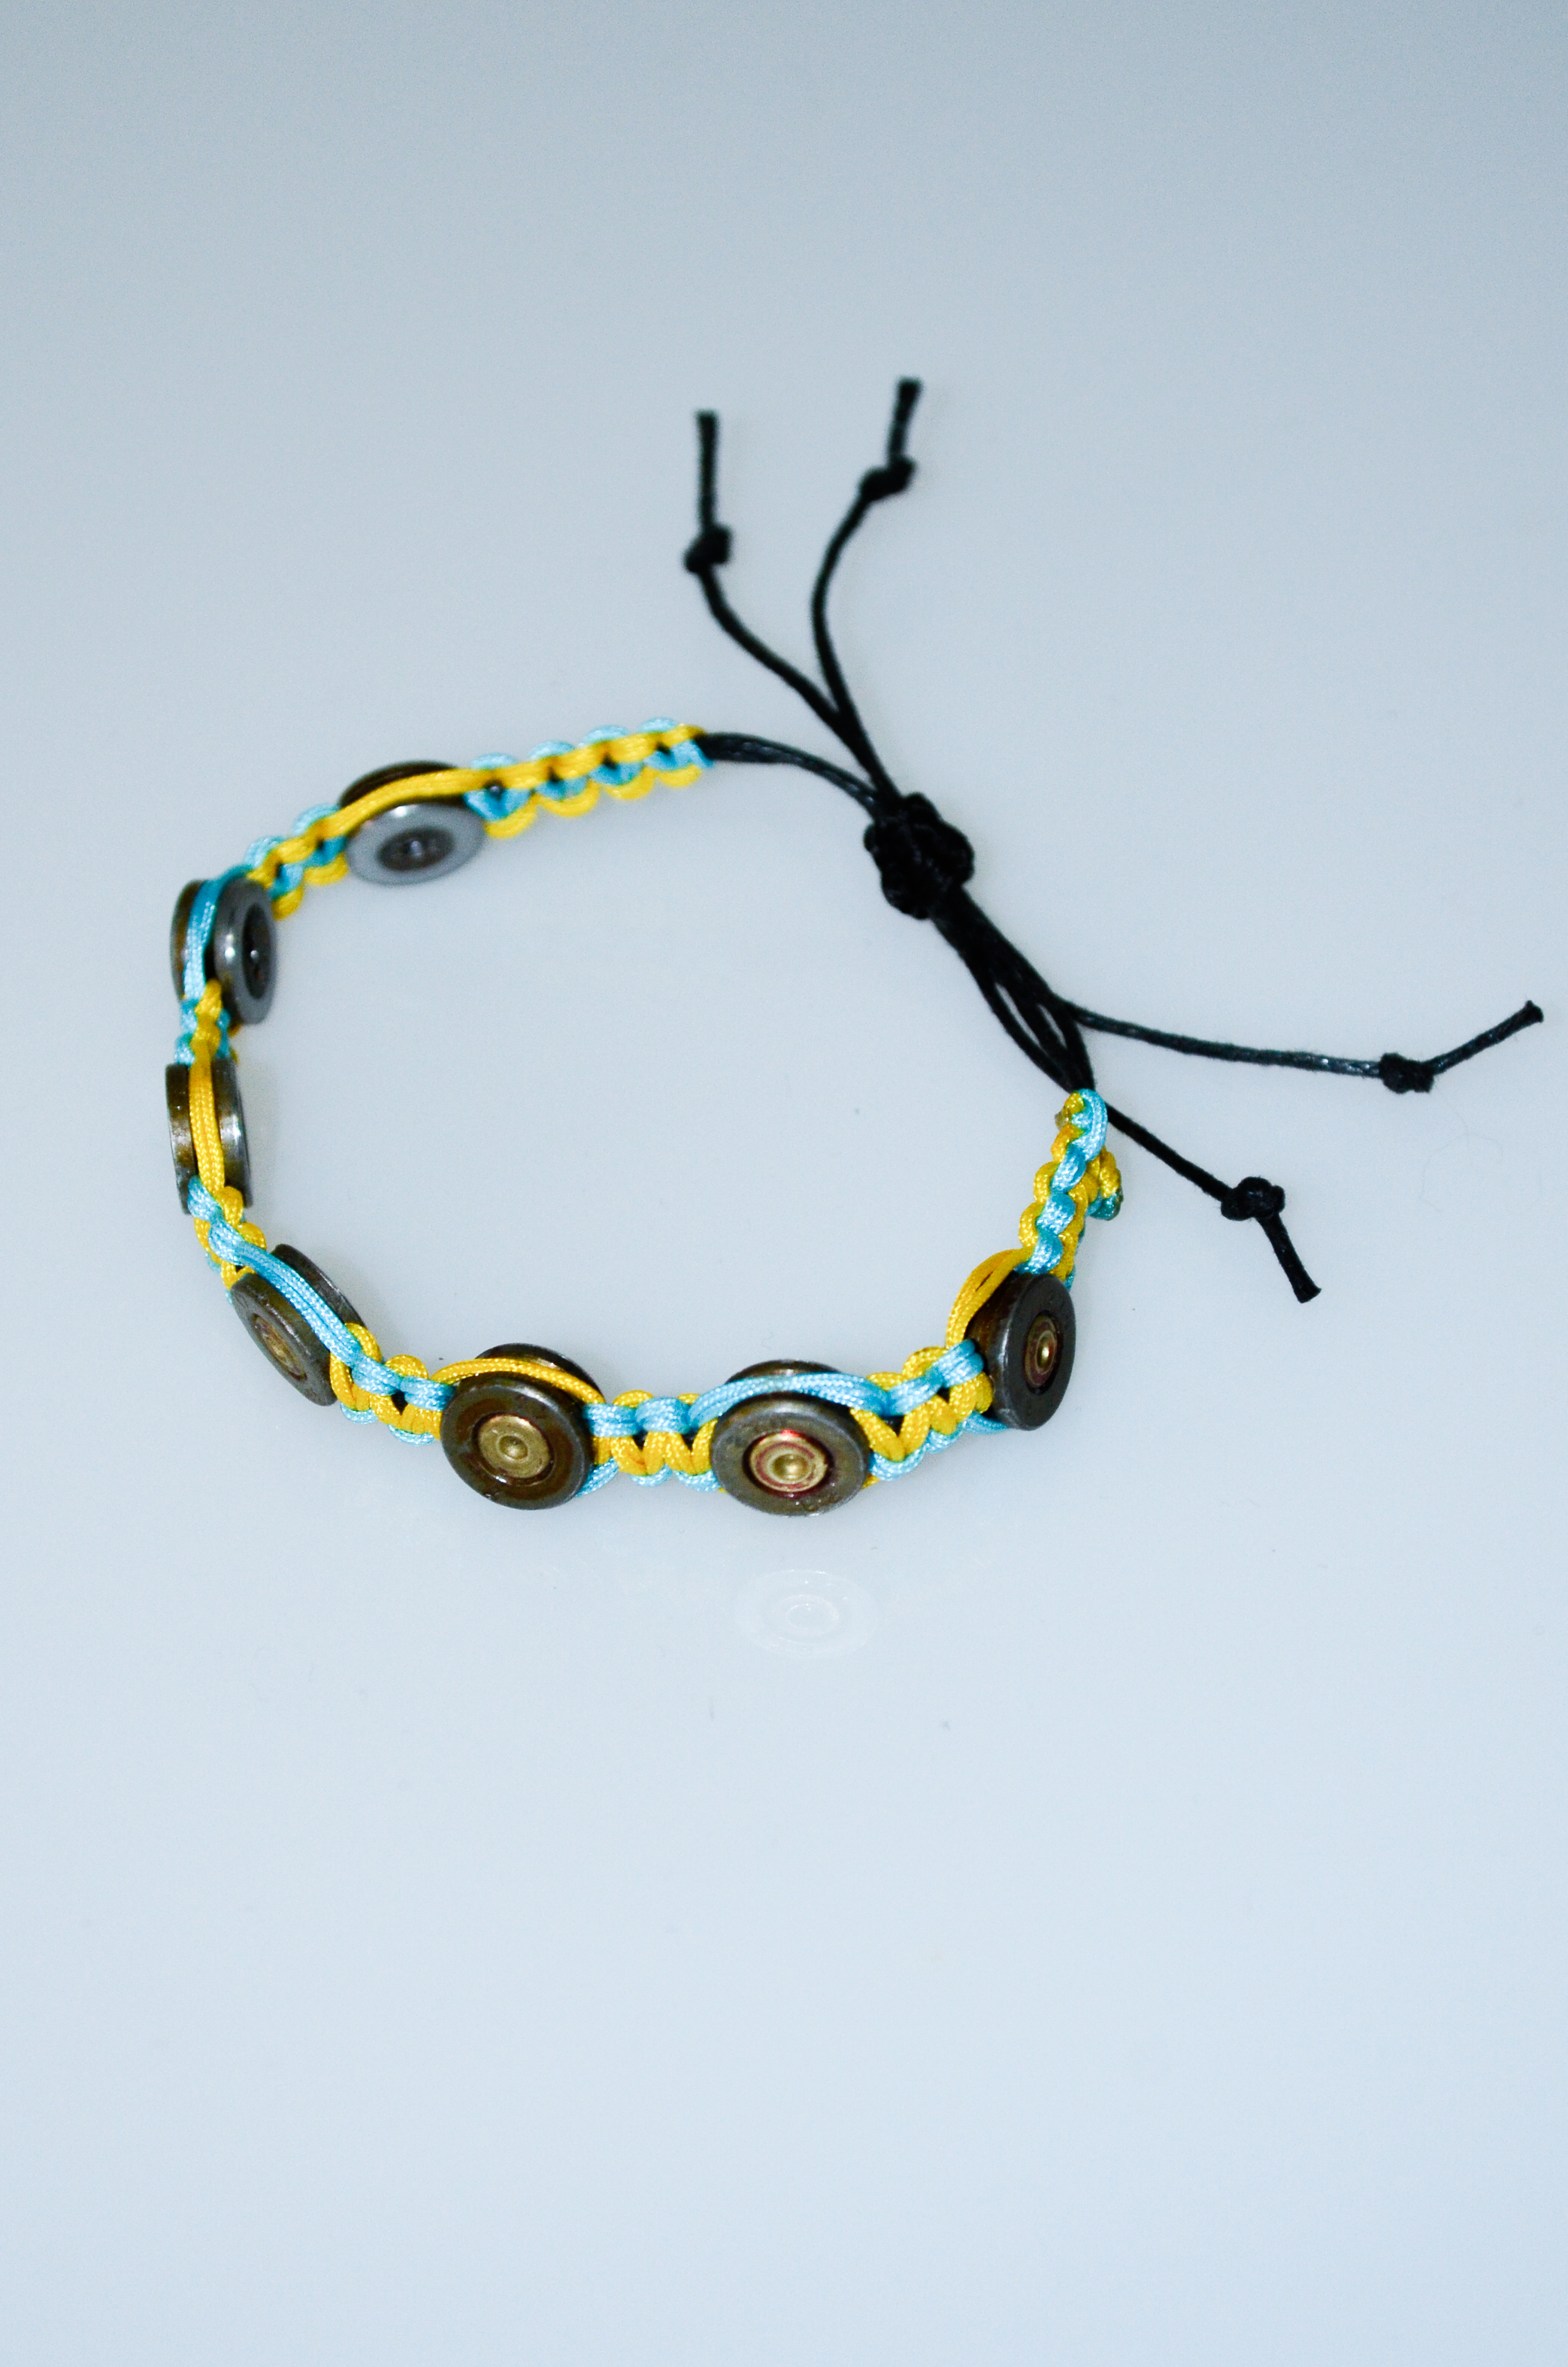 The bracelet is made of spent shell casings Glory to Ukraine